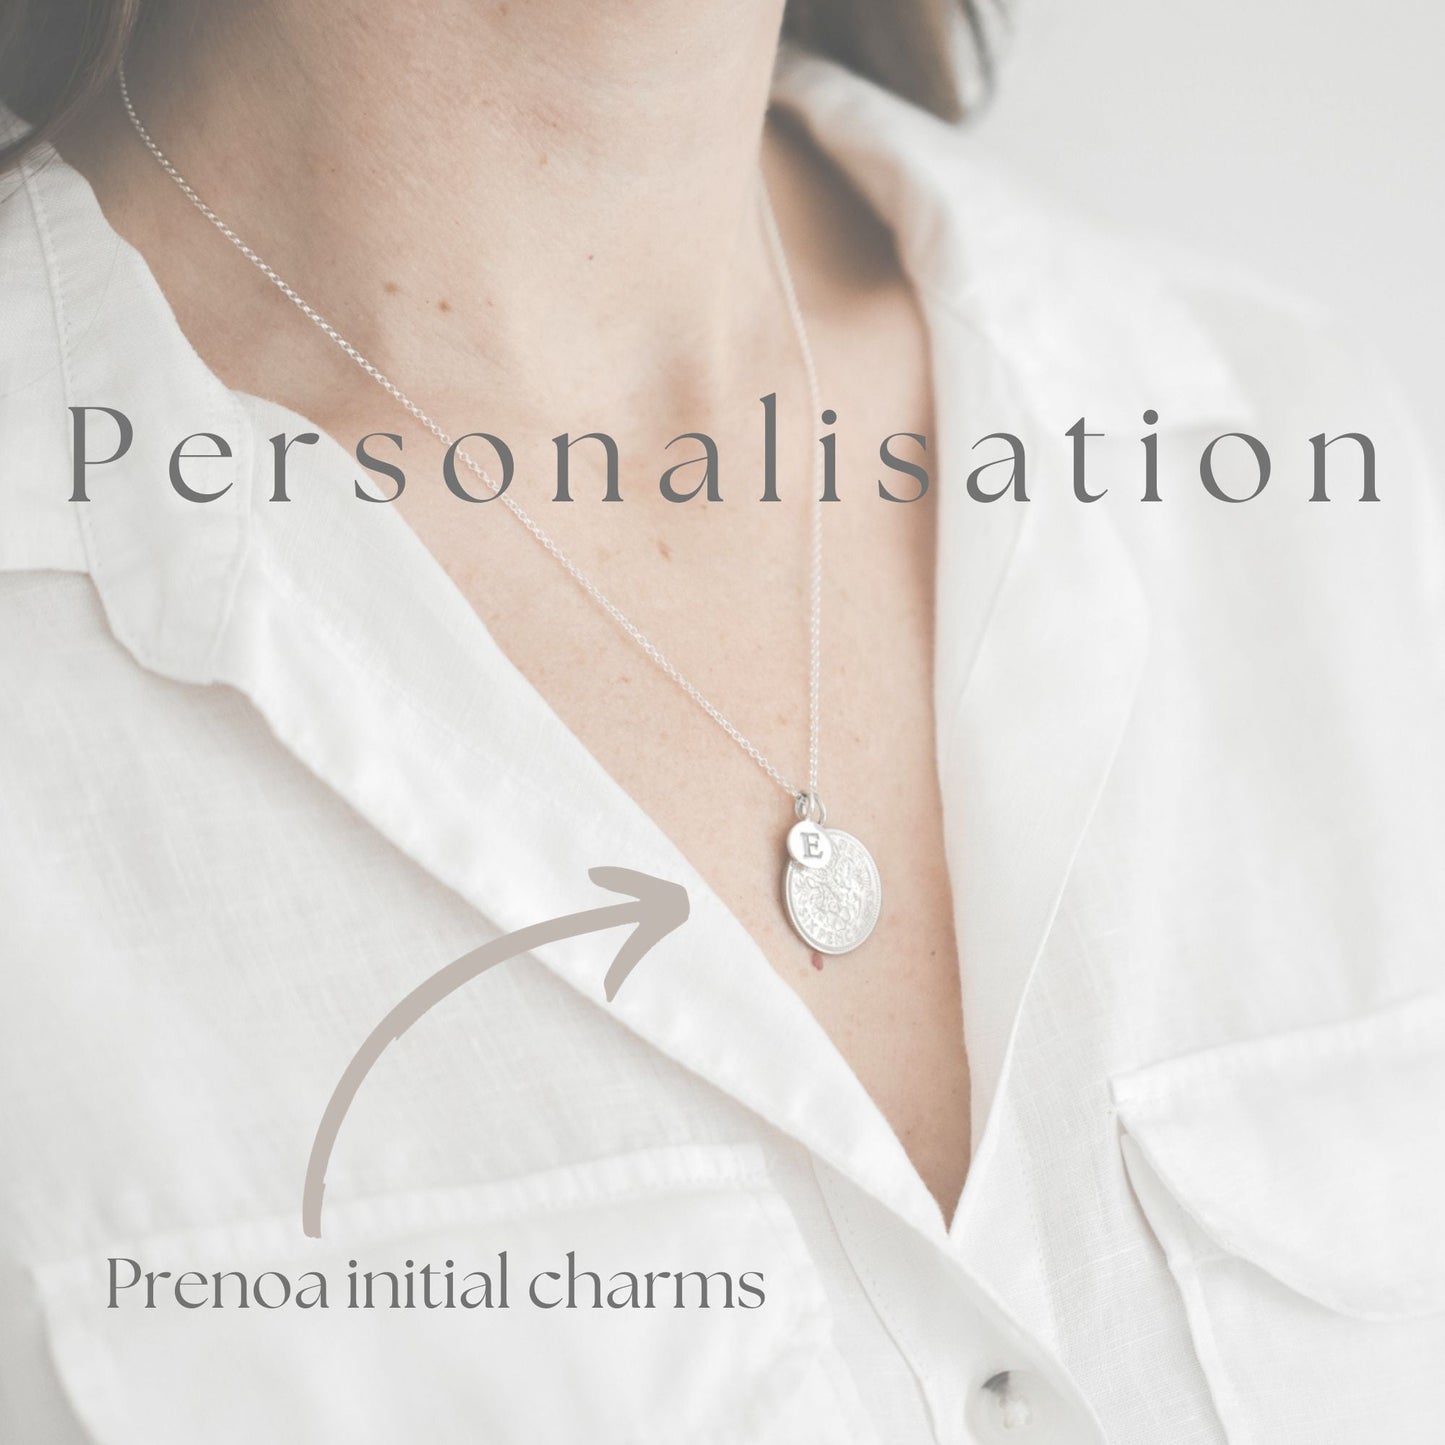 Personalise your design with a sterling silver initial charm of your choice